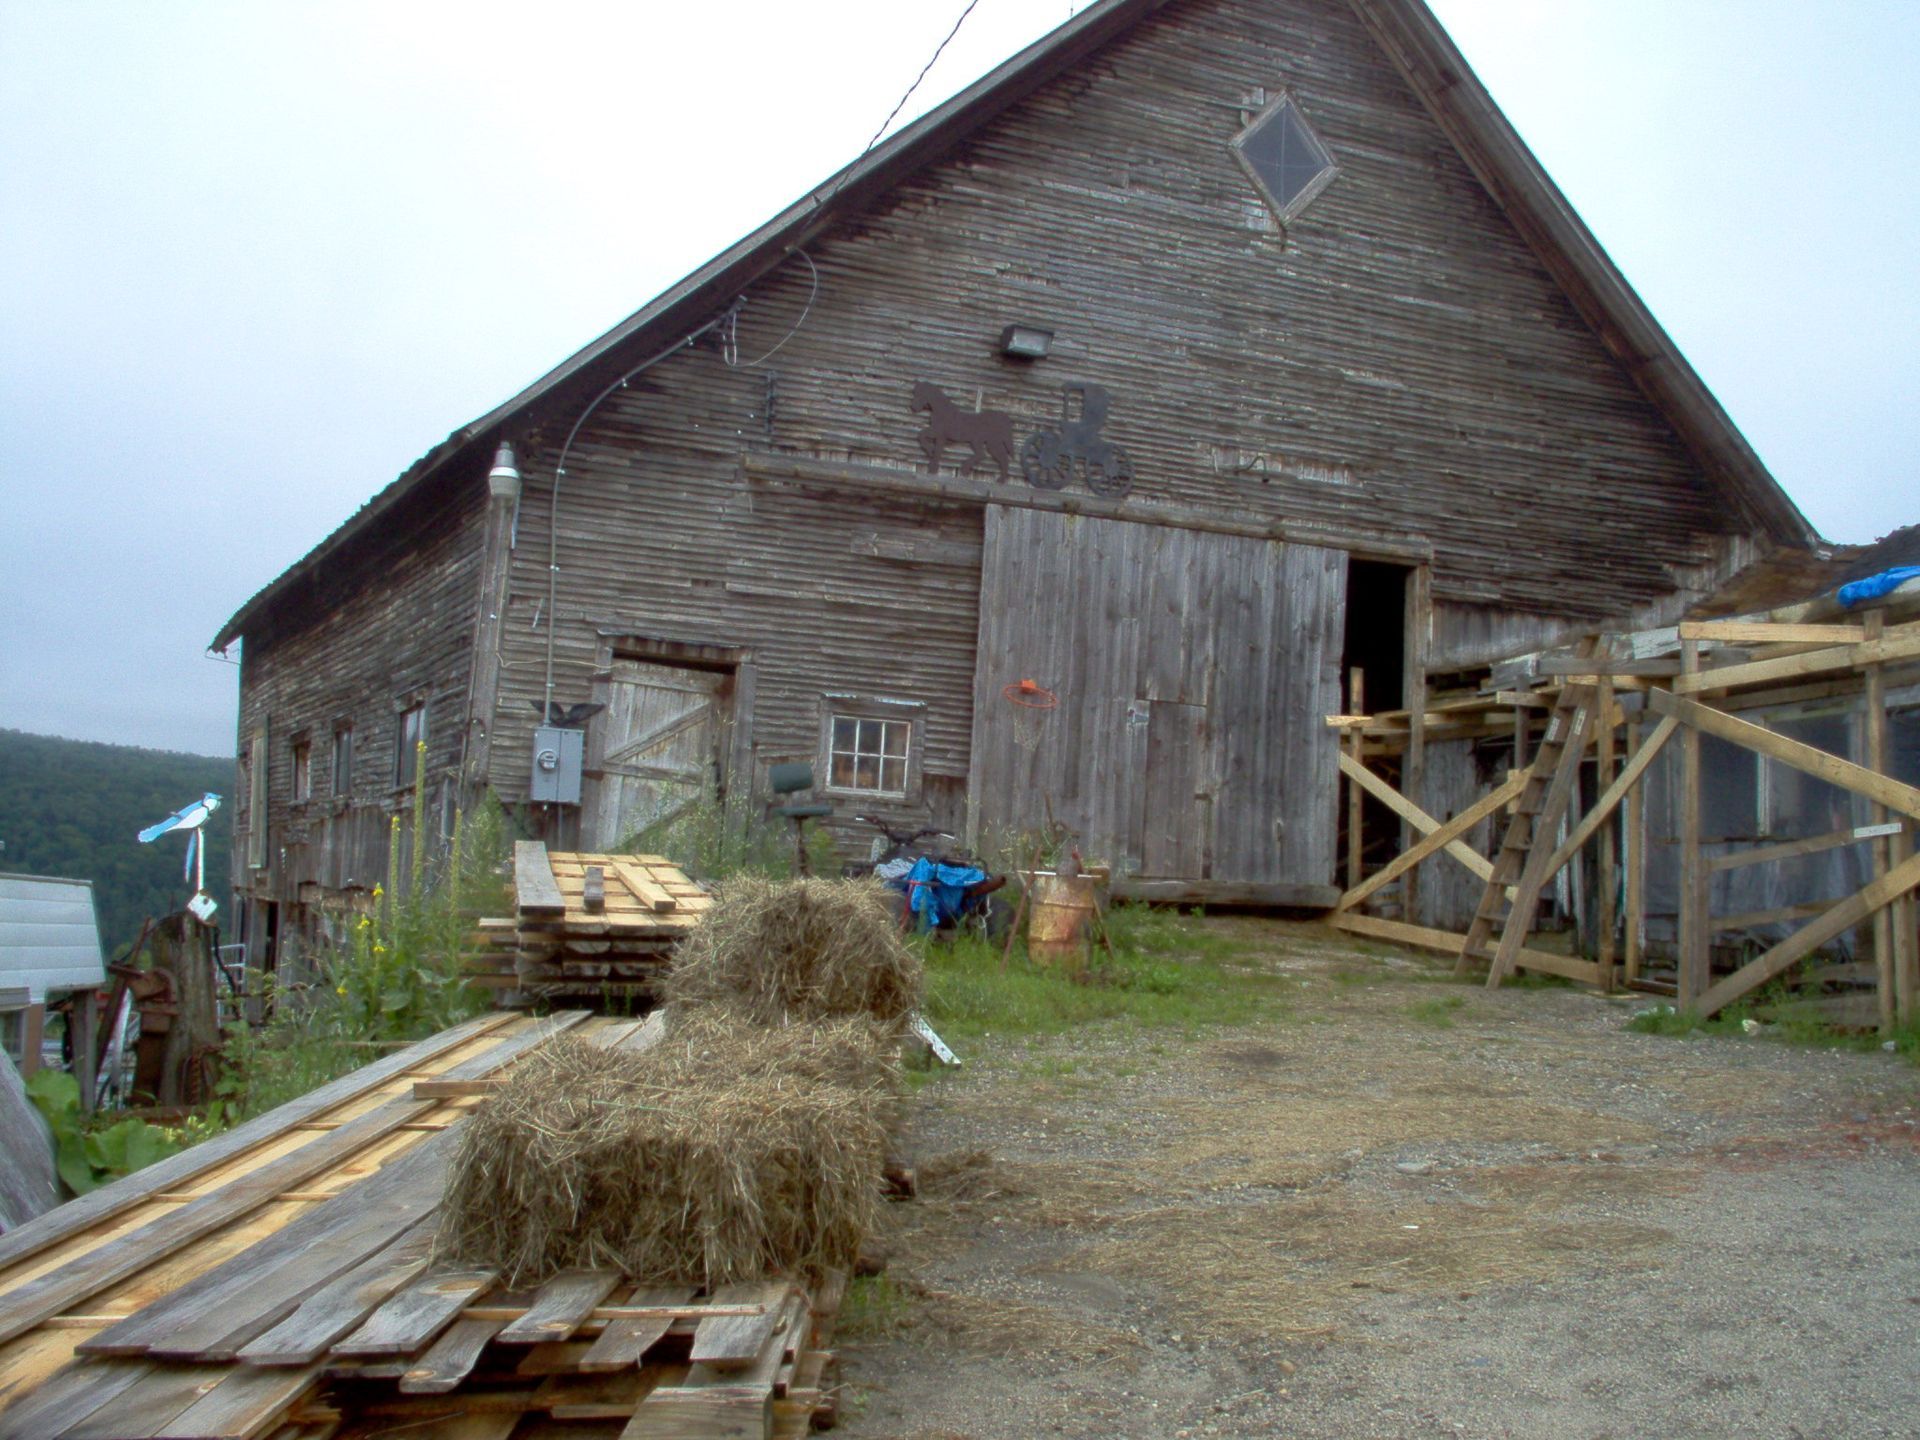 View of George Berry Barn.